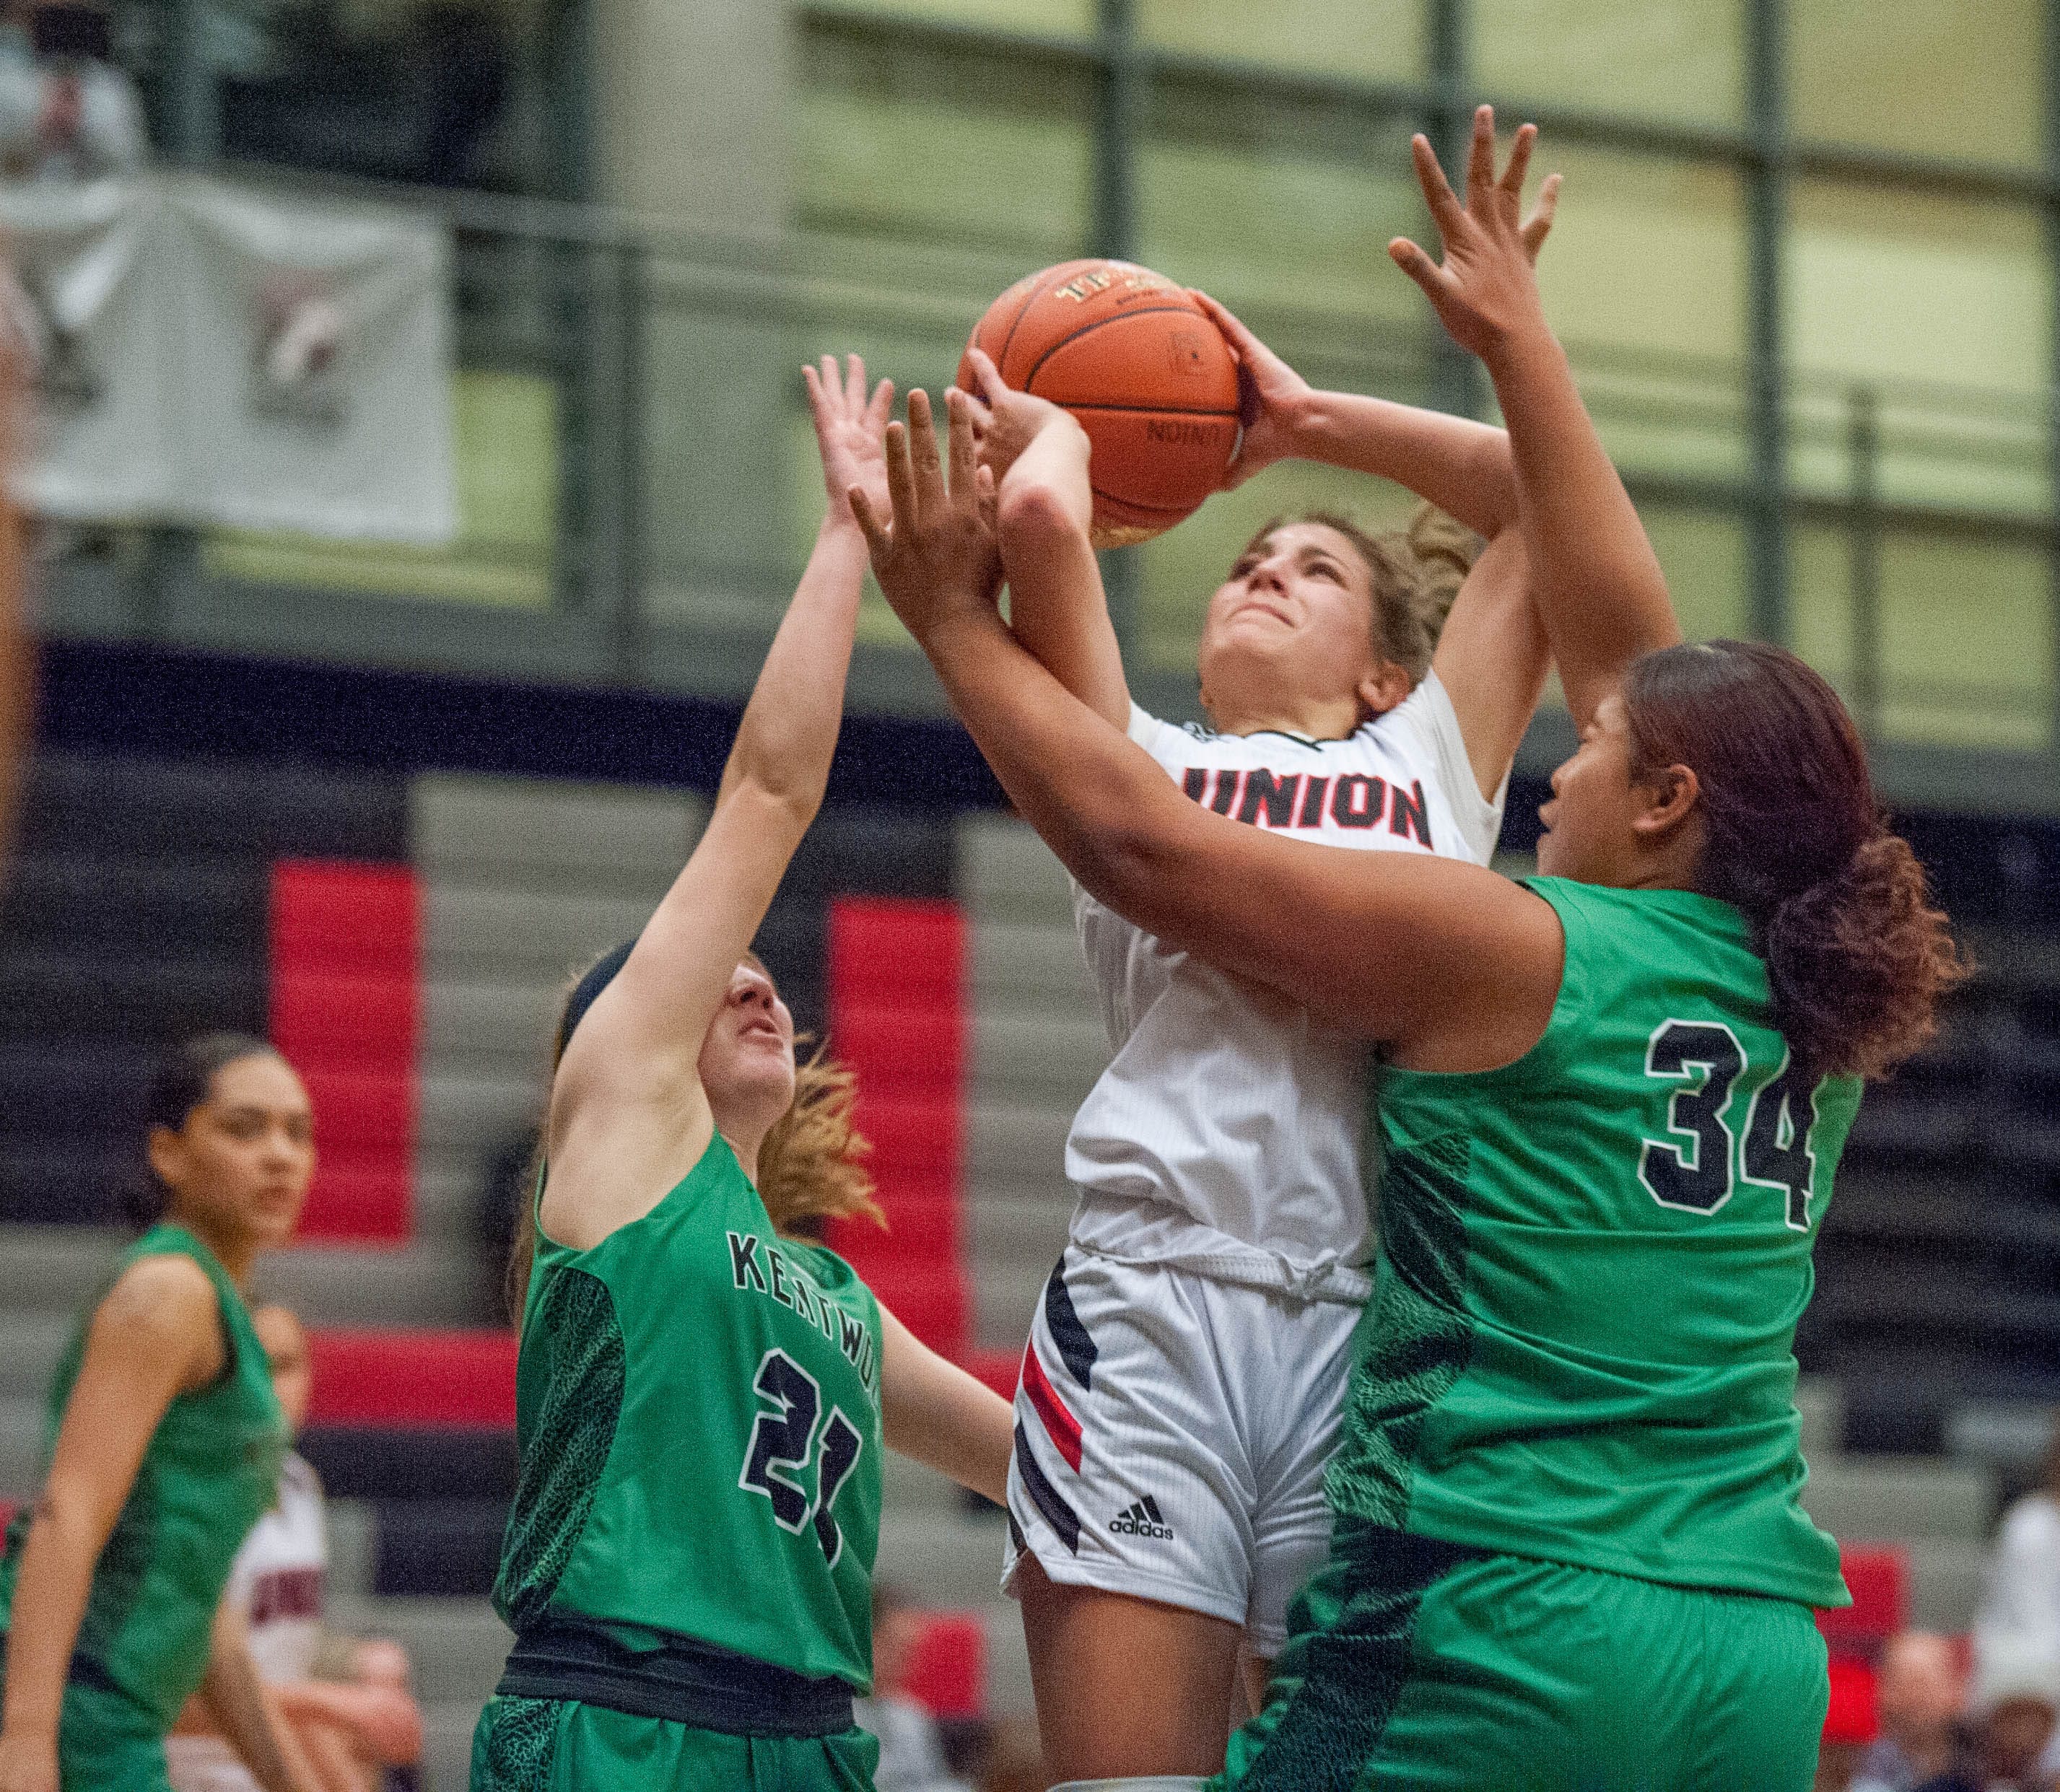 Union's Mason Oberg drives between a pair of Kentwood defenders in a girls basketball game at Union High School.